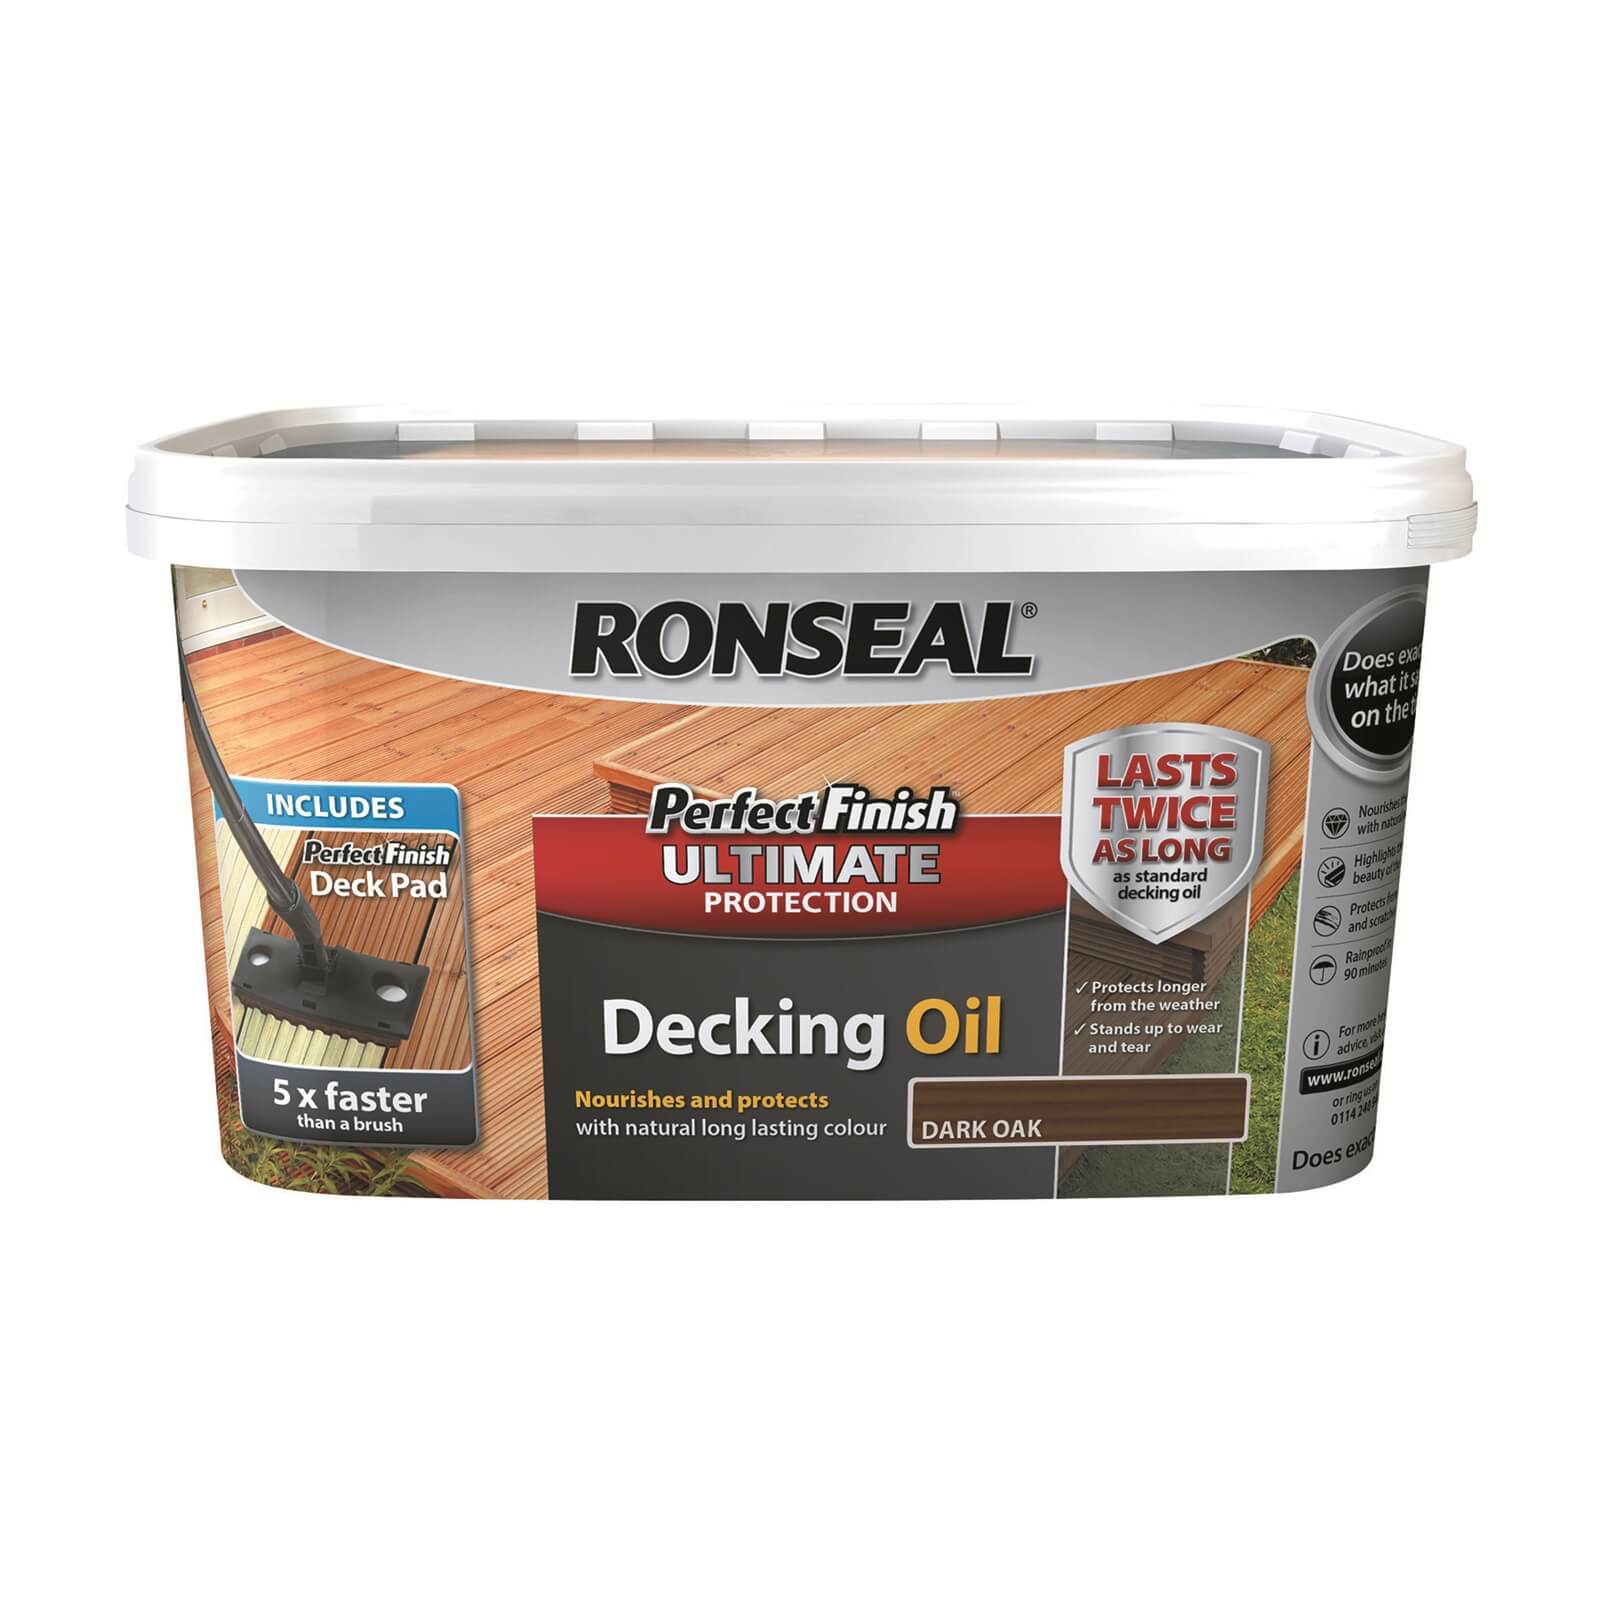 Ronseal Perfect Finish Ultimate Decking Stain Dark Oak - 2.5L